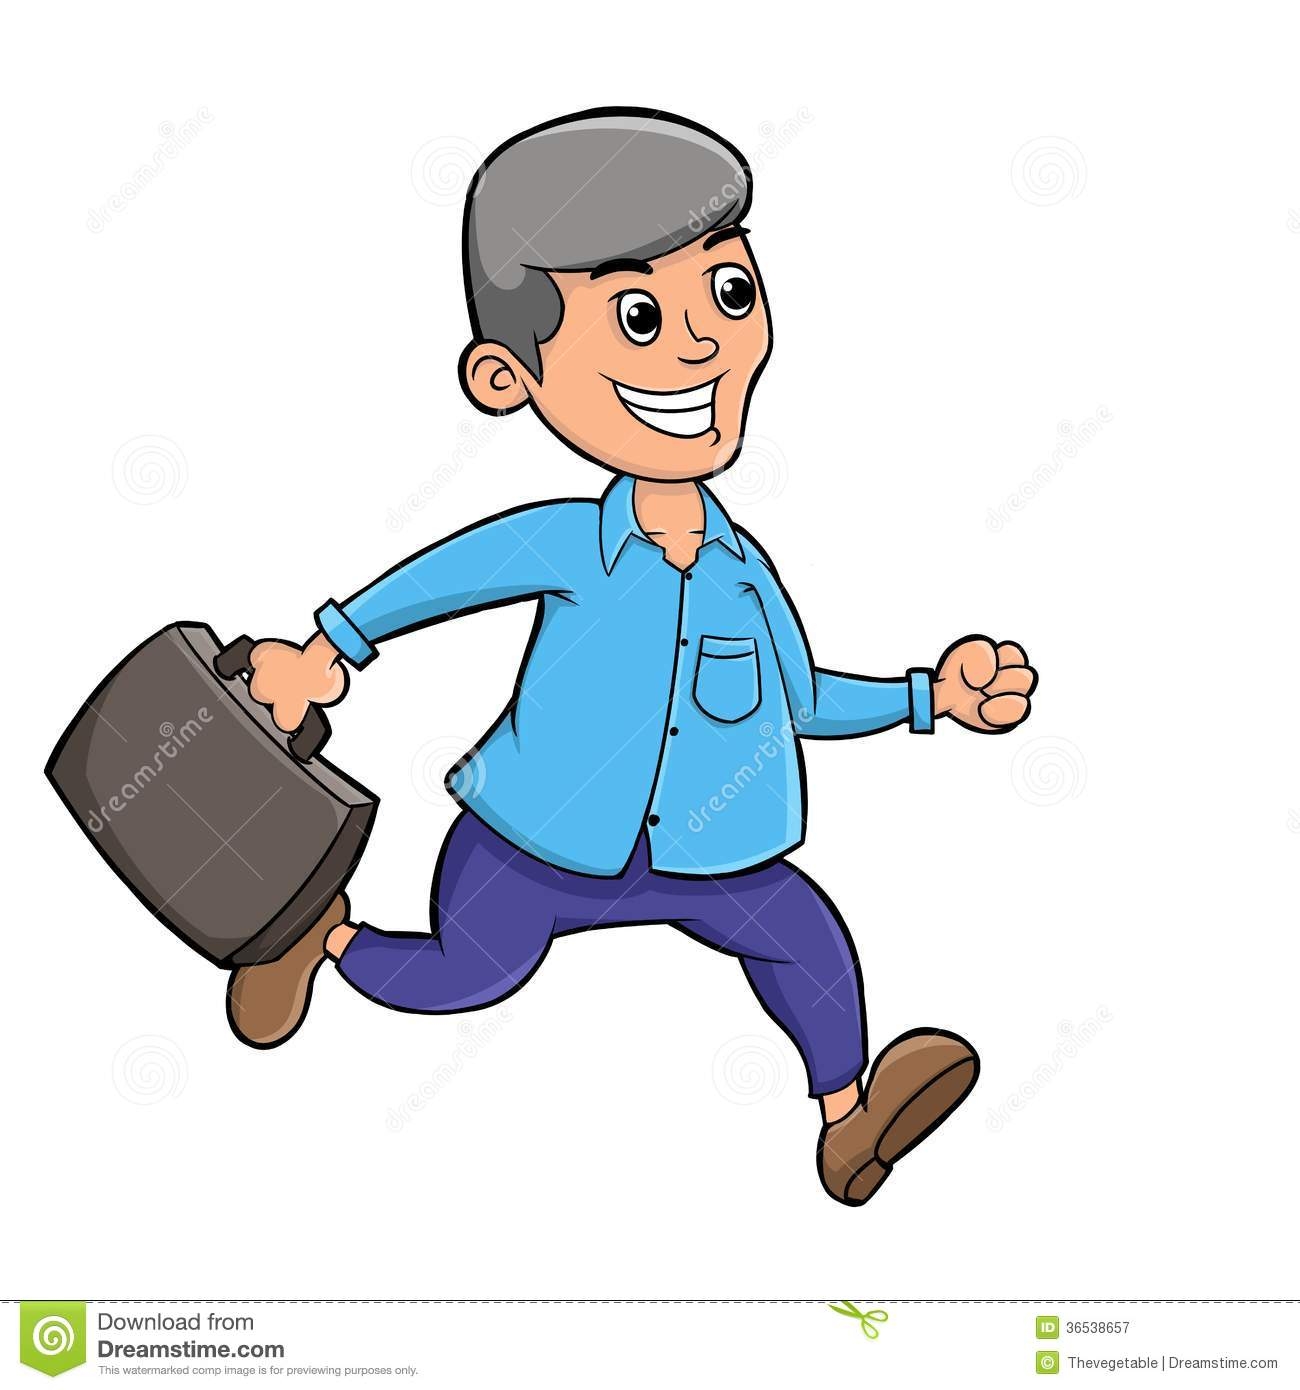 Go to work clipart